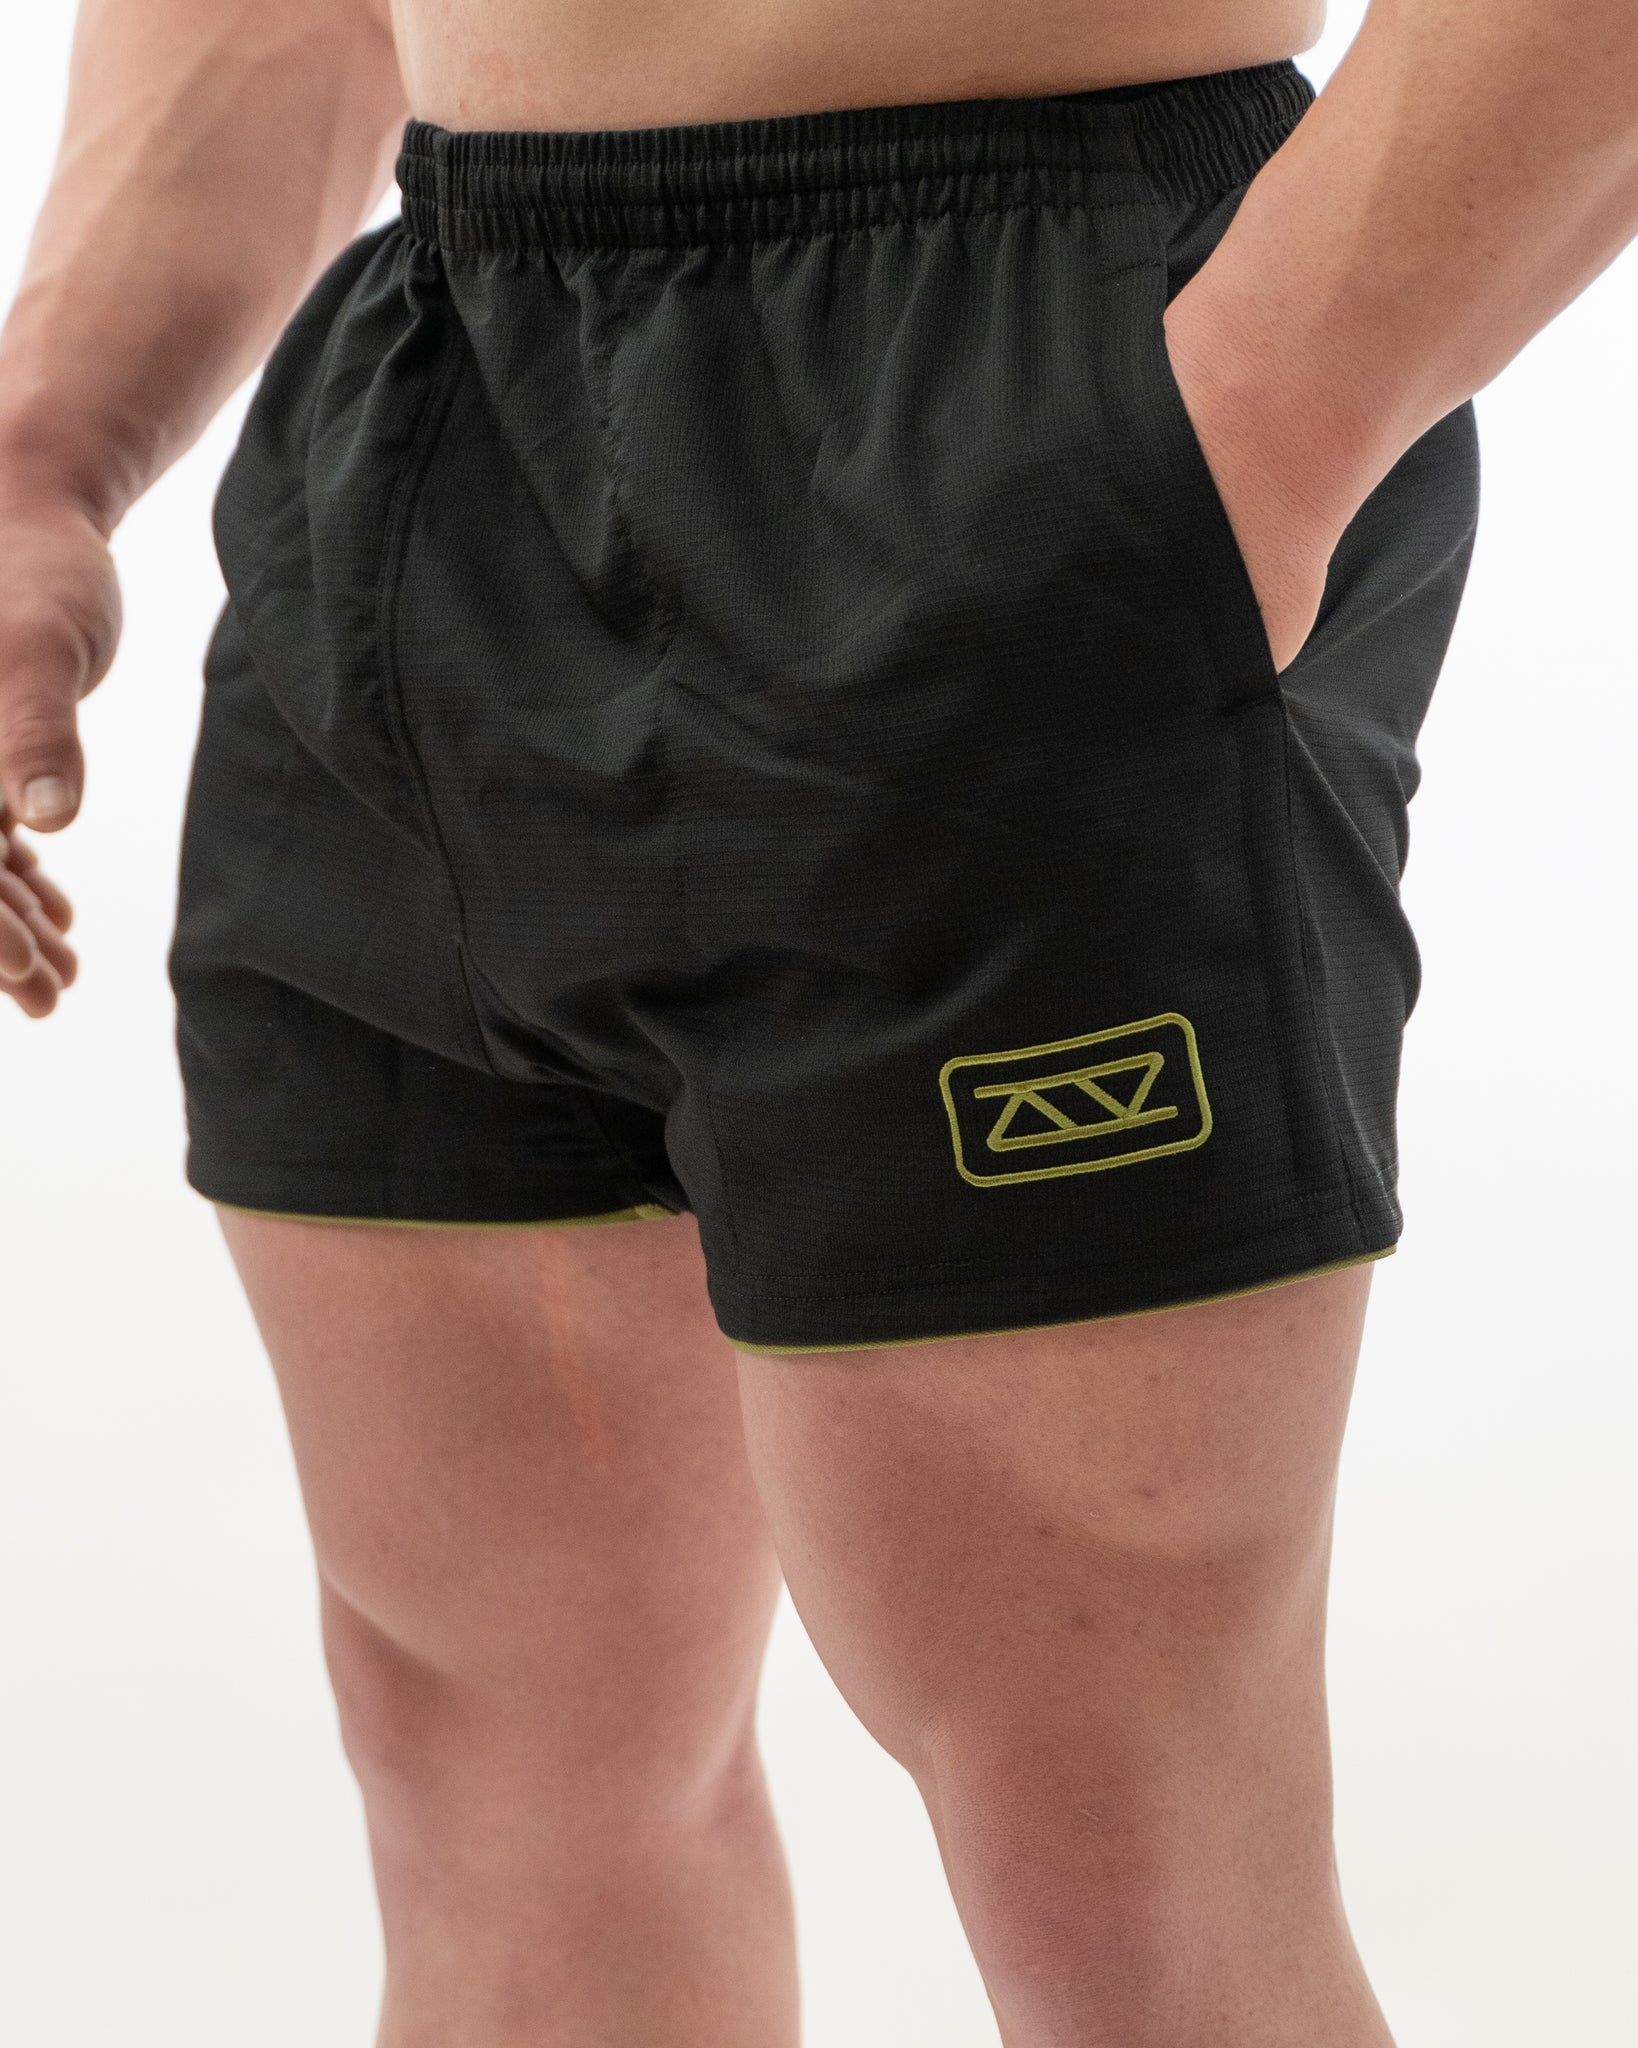 Rugby Shorts - Army Green